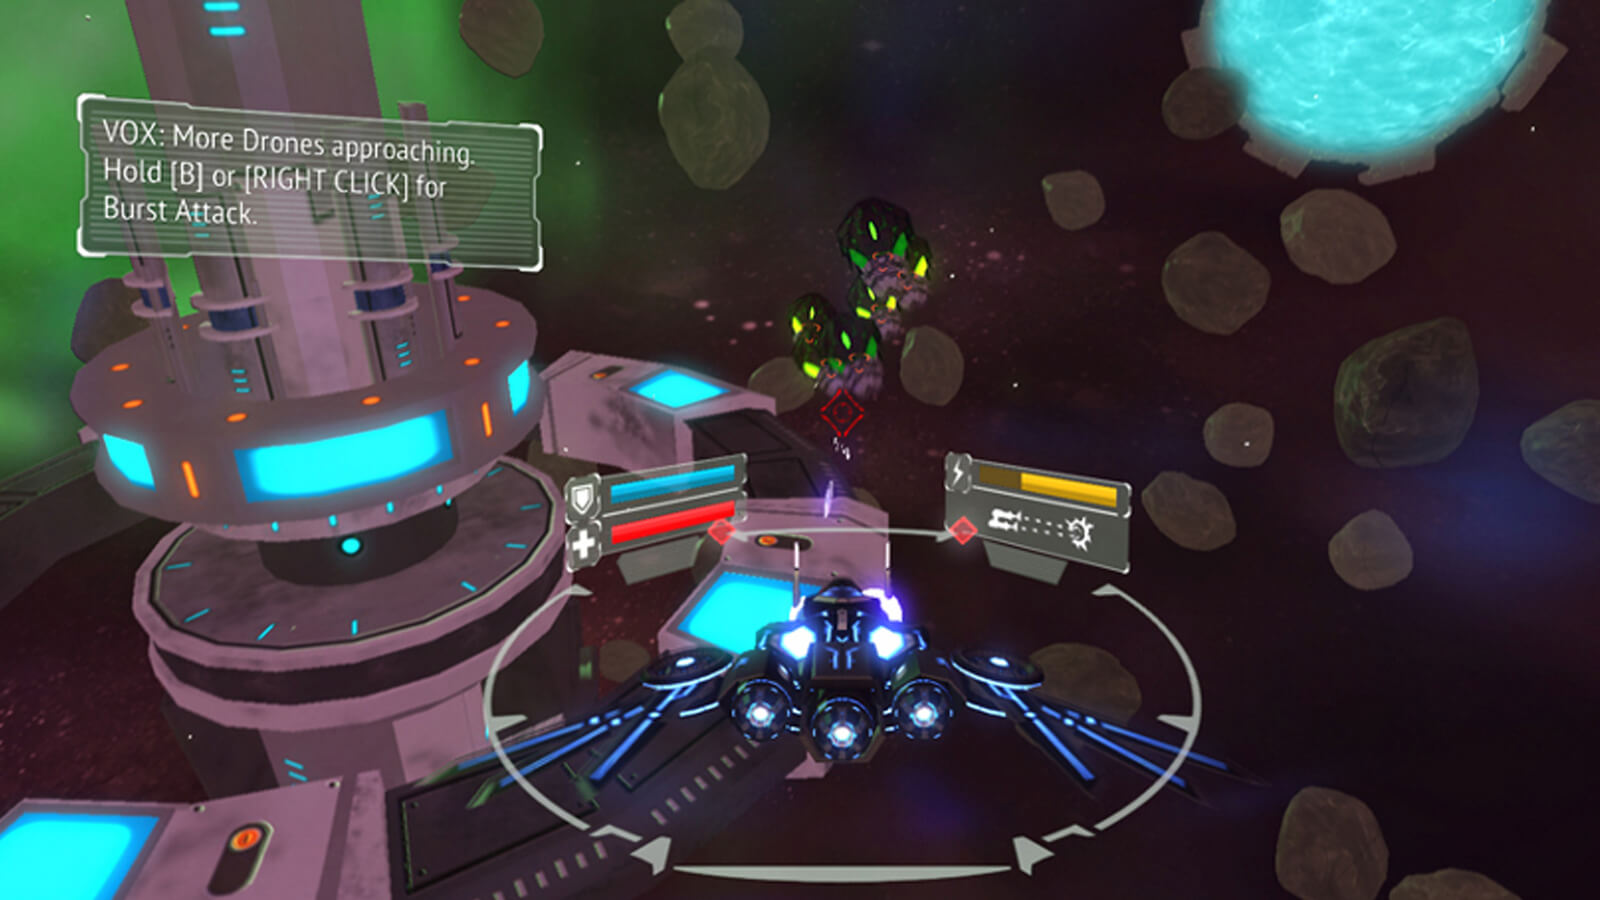 The blue and black space ship approaches enemies with a space station and asteroid field in the background.